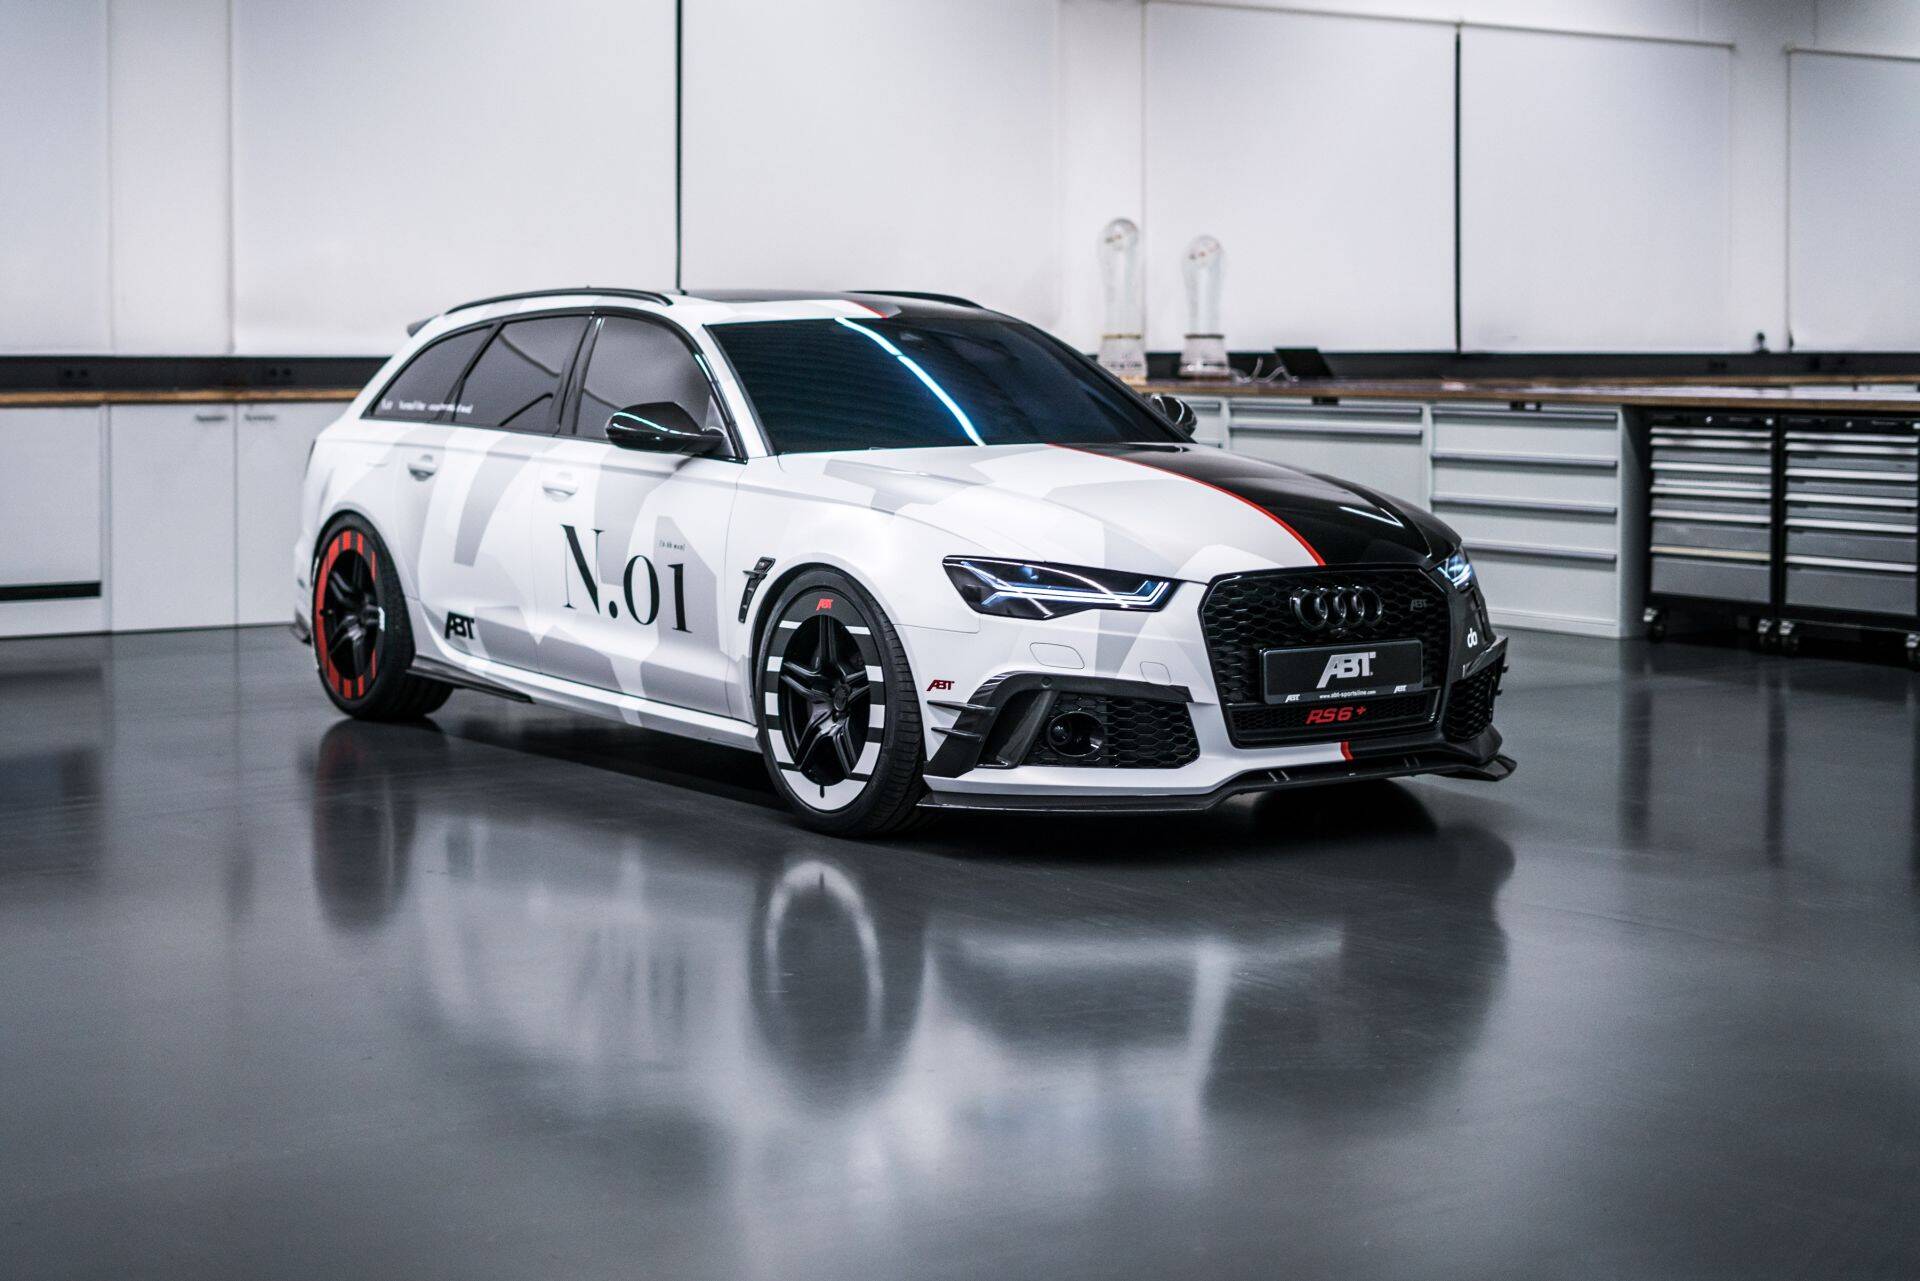 735 HP and “split camo” – ABT builds unique RS6+ for skiing star Jon Olsson  - Audi Tuning, VW Tuning, Chiptuning von ABT Sportsline.